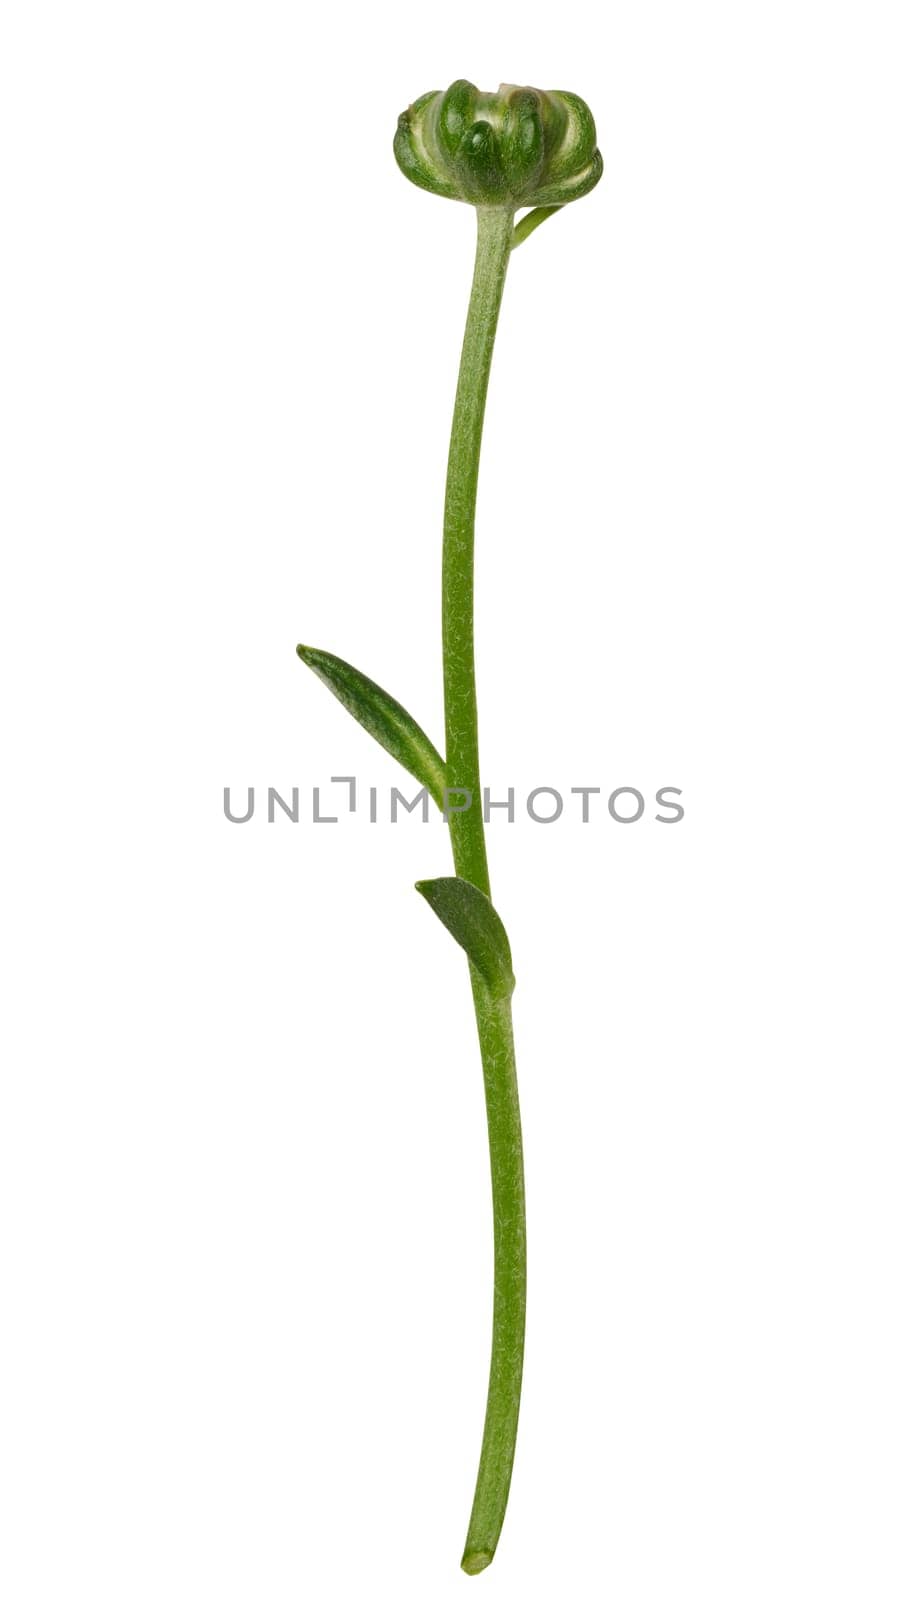 Green stem of chrysanthemum with white unblown bud on isolated background